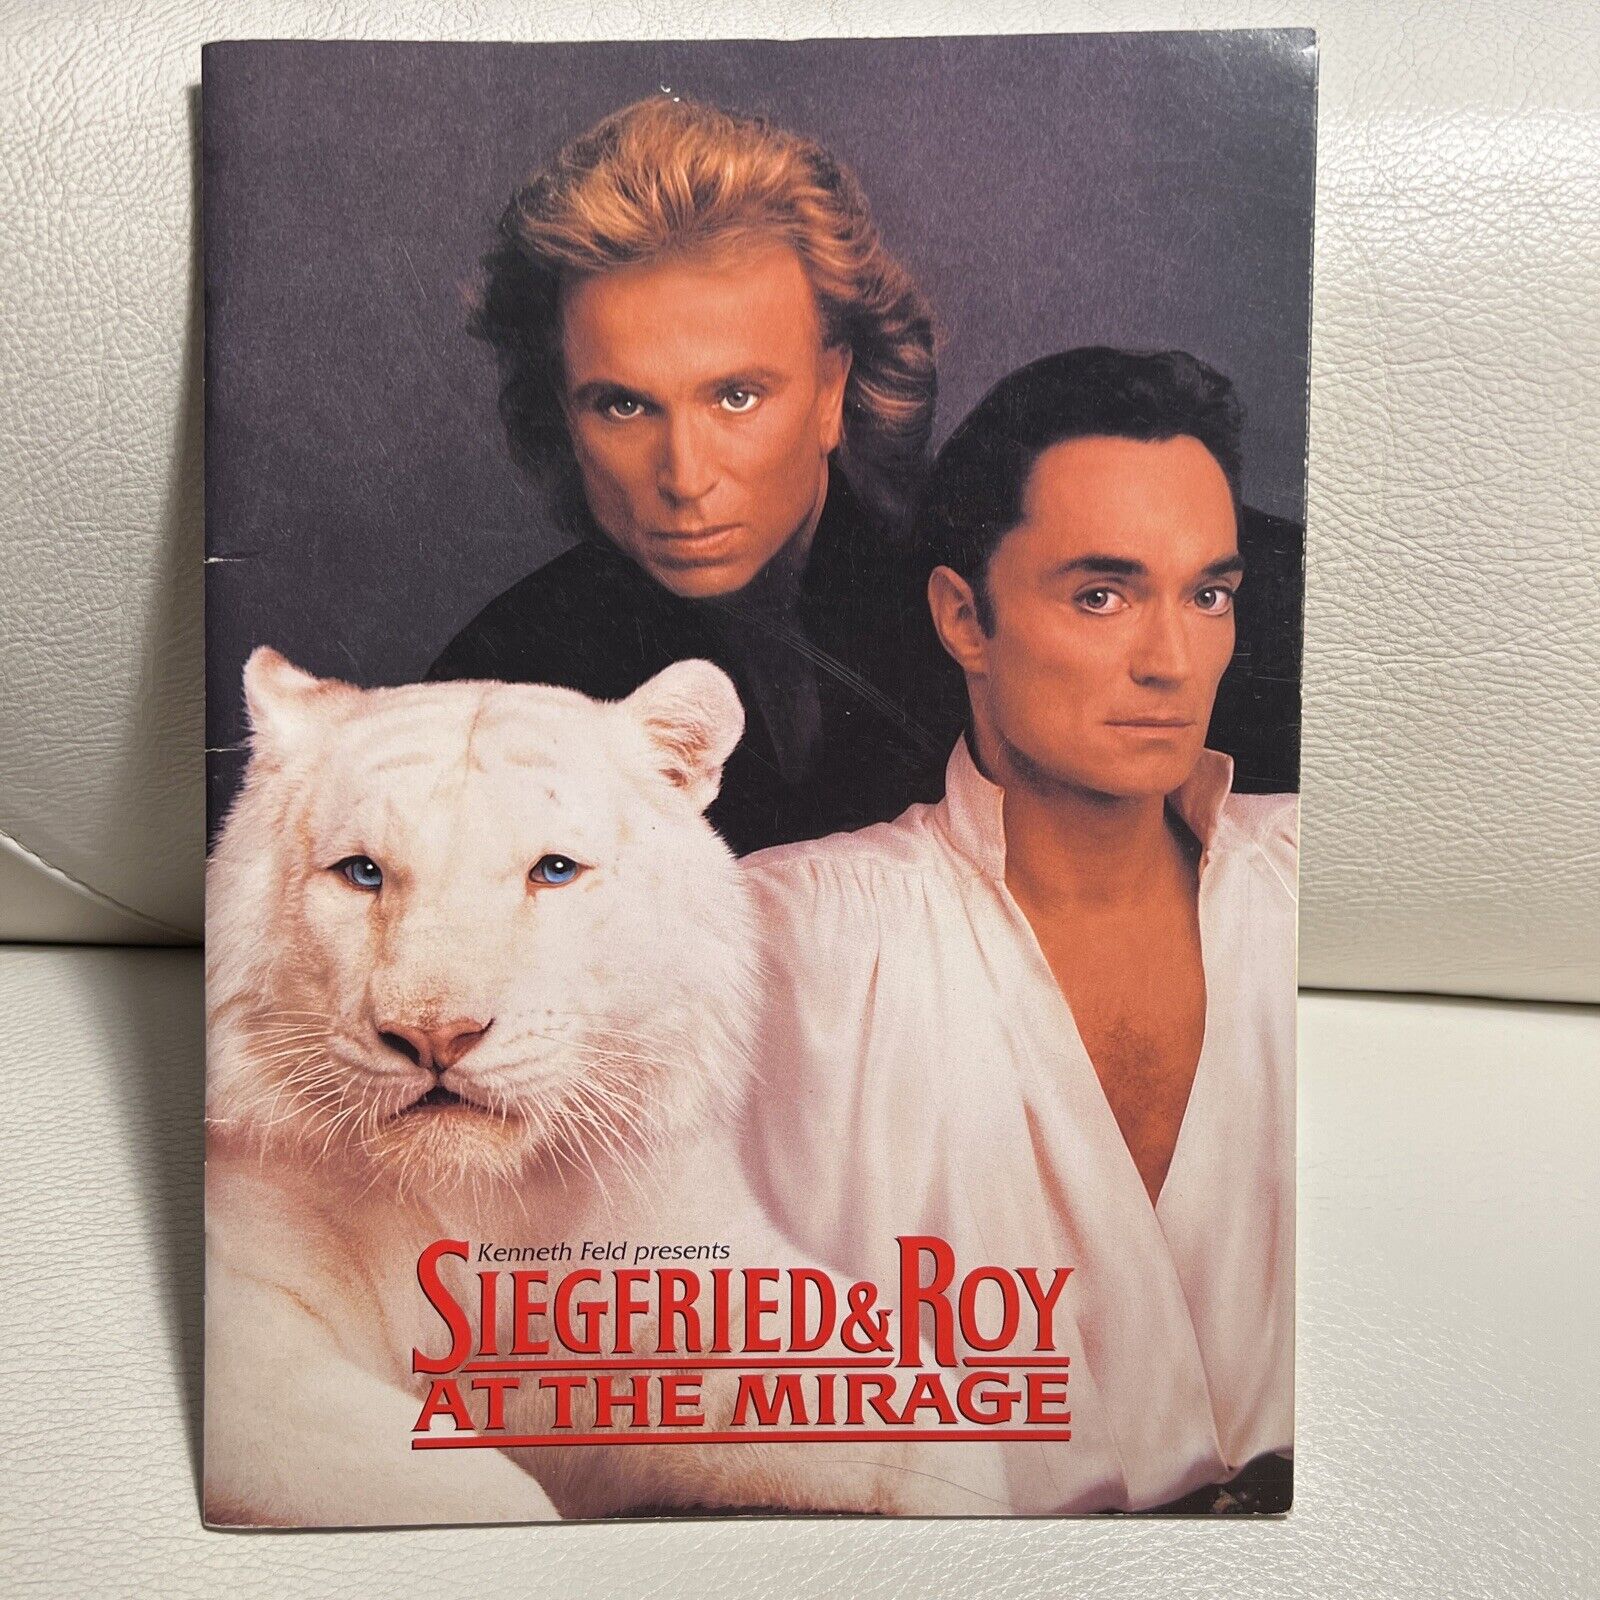 Siegfried and Roy At The Mirage Souvenir Book, 1994